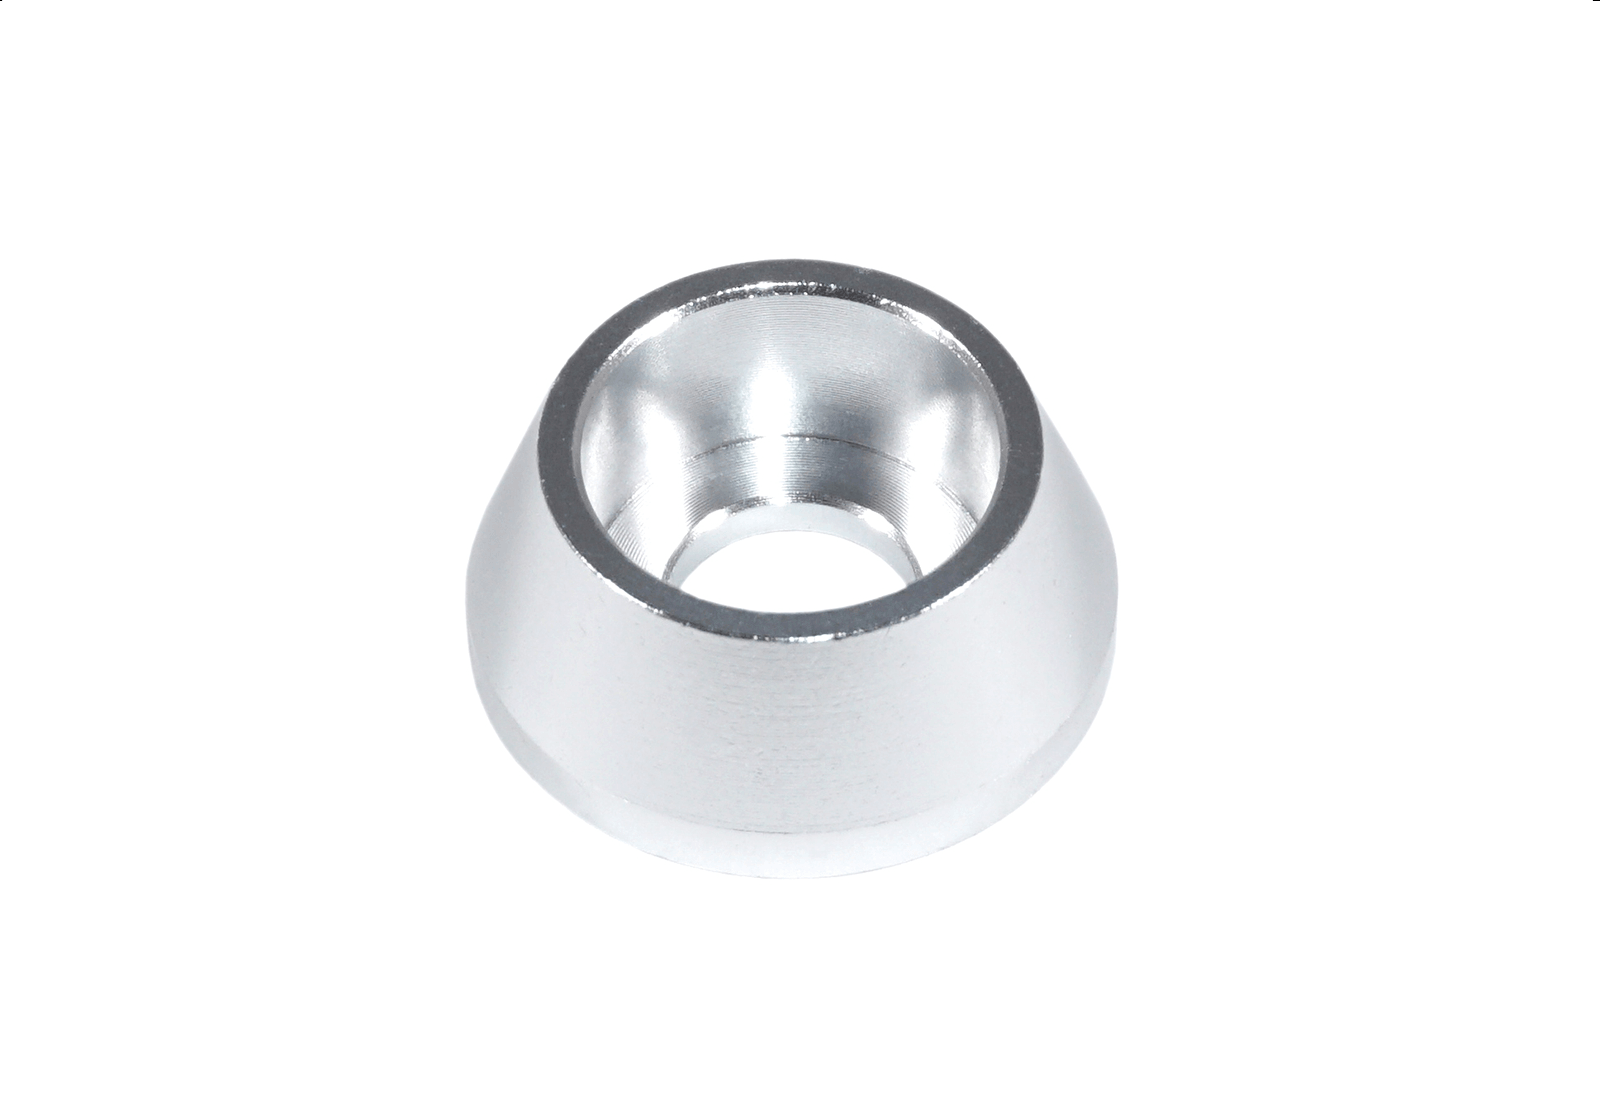 Zoro Select Spherical Washer, Fits Bolt Size M10 18-8 Stainless